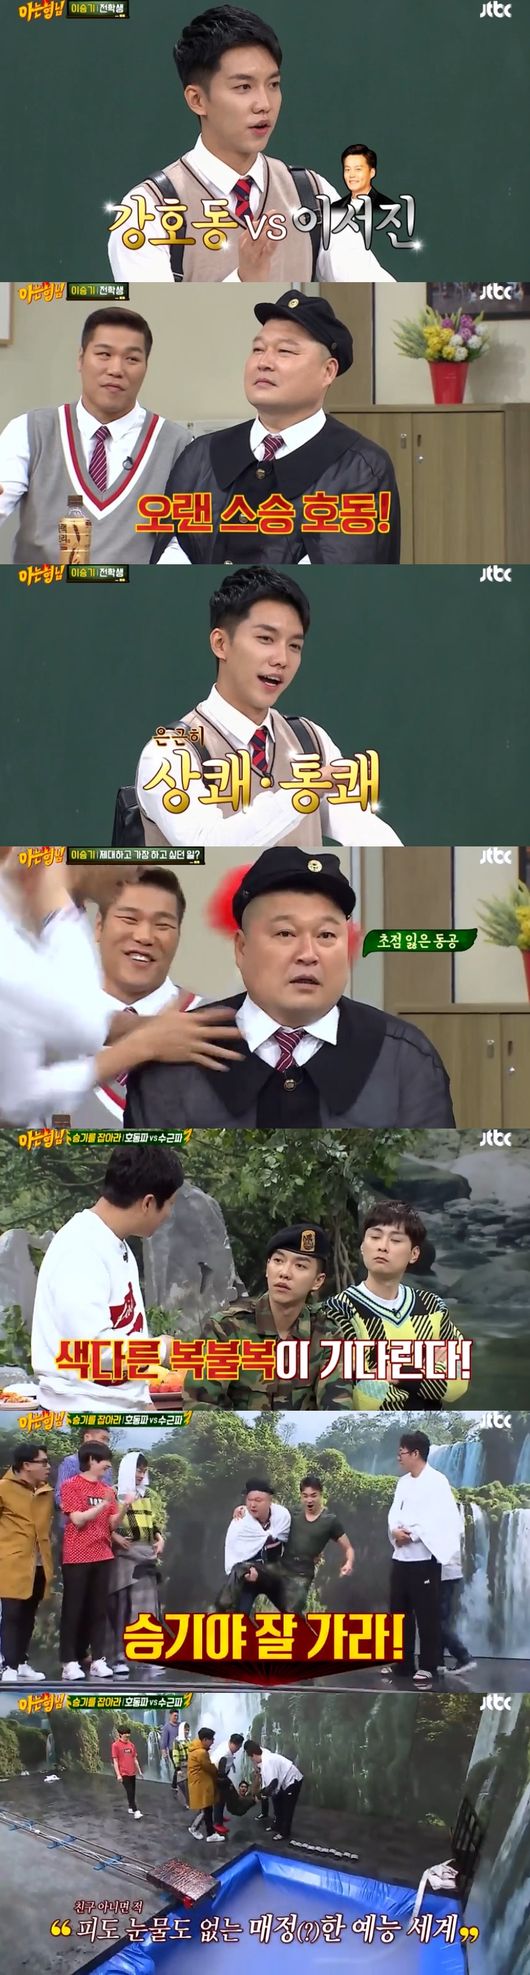 It is Kang Ho-dong, Lee Soo-geun, Lee Seung-gi shooting One Night Two Day from Brother I Know.Thanks to the audience rating chart, it was excellent.According to Nielsen Korea, an audience rating professional research firm on 22nd, JTBC brother you know - Lee Seung-gi edition broadcasted on 21th is 6.2% audience rating (national household standard) was recorded.This is the ratio compared to last time Yumin Sang - Munseun has appeared.It is a figure that gained 1 percentage point.However, topicality hotter than audience rating.Lee Seung-gi who came out to transfer students boasted a majesty that seems to be a name false entertainer emperor and attracted viewers from the cathode ray tube on the weekends evening.As usual a bonus pushed push.More than anything, the sea that attracted a hot topic in the reunion of Kang Ho-dong, Lee Soo-geun, Lee Seung-gi from before broadcasting.These are the hero who led the heyday through KBS 2 TV Happy Sunday - 1 night 2 days season 1 for 5 years since 2007.The picture of the three people since the whole area of ​​Lee Seung-gi at the end of last year is the first time this older brother I know.Therefore, viewers hoped for the first night two days Kemi of the past year and shouted the older brother I know in Japan.Kang Ho-dong, Lee Soo-geun, Lee Seung-gi boasted unchanged compatibility breathing to meet viewers expectations.Kang Ho-dong Take Lee Seung-gi was still as usual Fortunetely thanks to the three people, the game became better.Kang Ho-dongs My brother Lee Seung-gi love is even more robust, Lee Seung-gi has a relaxing and comfortable smile with big brothers and entertainment.It was a different laugh from the time of the fixed appearance SBS The Butler Division.The viewers also made a smileful Saturday.One night two days from a brother you know while biting the season of the season one members such as Kang Ho-dong, Lee Soo-geun, Lee Seung-gi, Lee Seung-gi, Un Ji Won, MC Mon, Kim Jung Min It reminds me.Kang Ho-dong, Lee Seung-gi, Lee Soo-geun warmly greeted the tea room with Three Brothers of Entertainment who believes.Brother I know